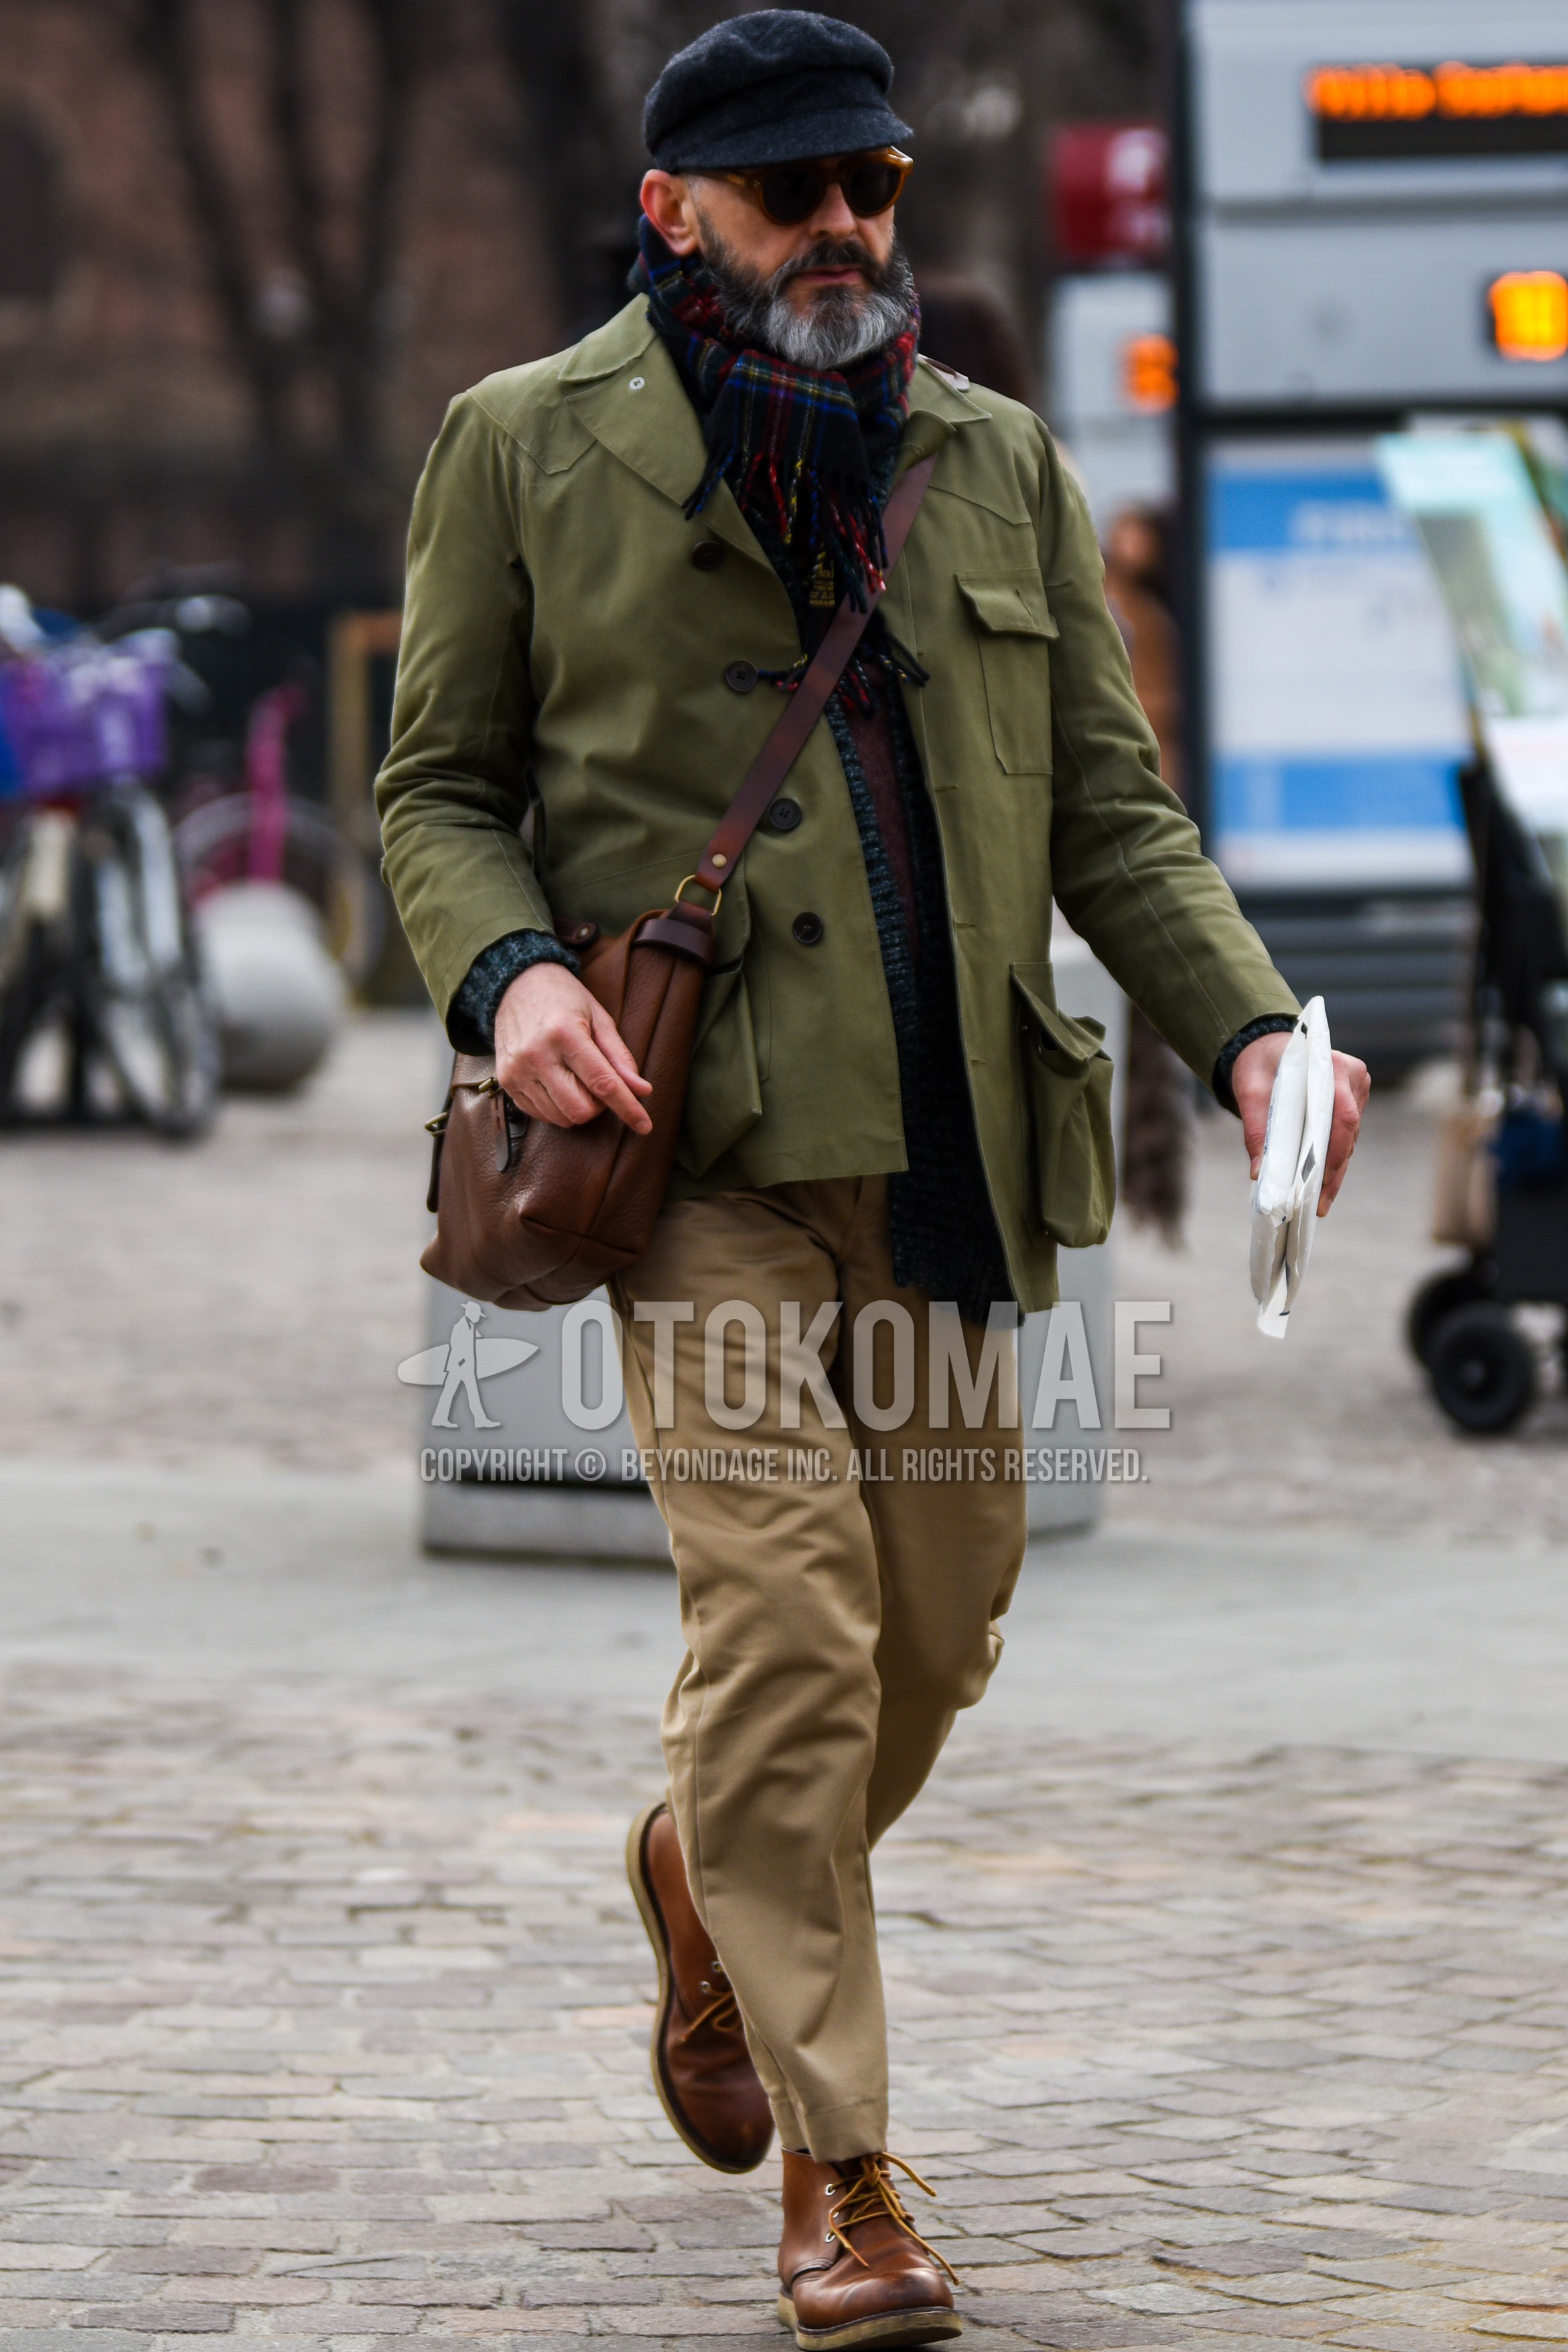 Men's autumn winter outfit with black plain hunting cap, brown tortoiseshell sunglasses, multi-color check scarf, olive green plain shirt jacket, beige plain chinos, brown  boots.